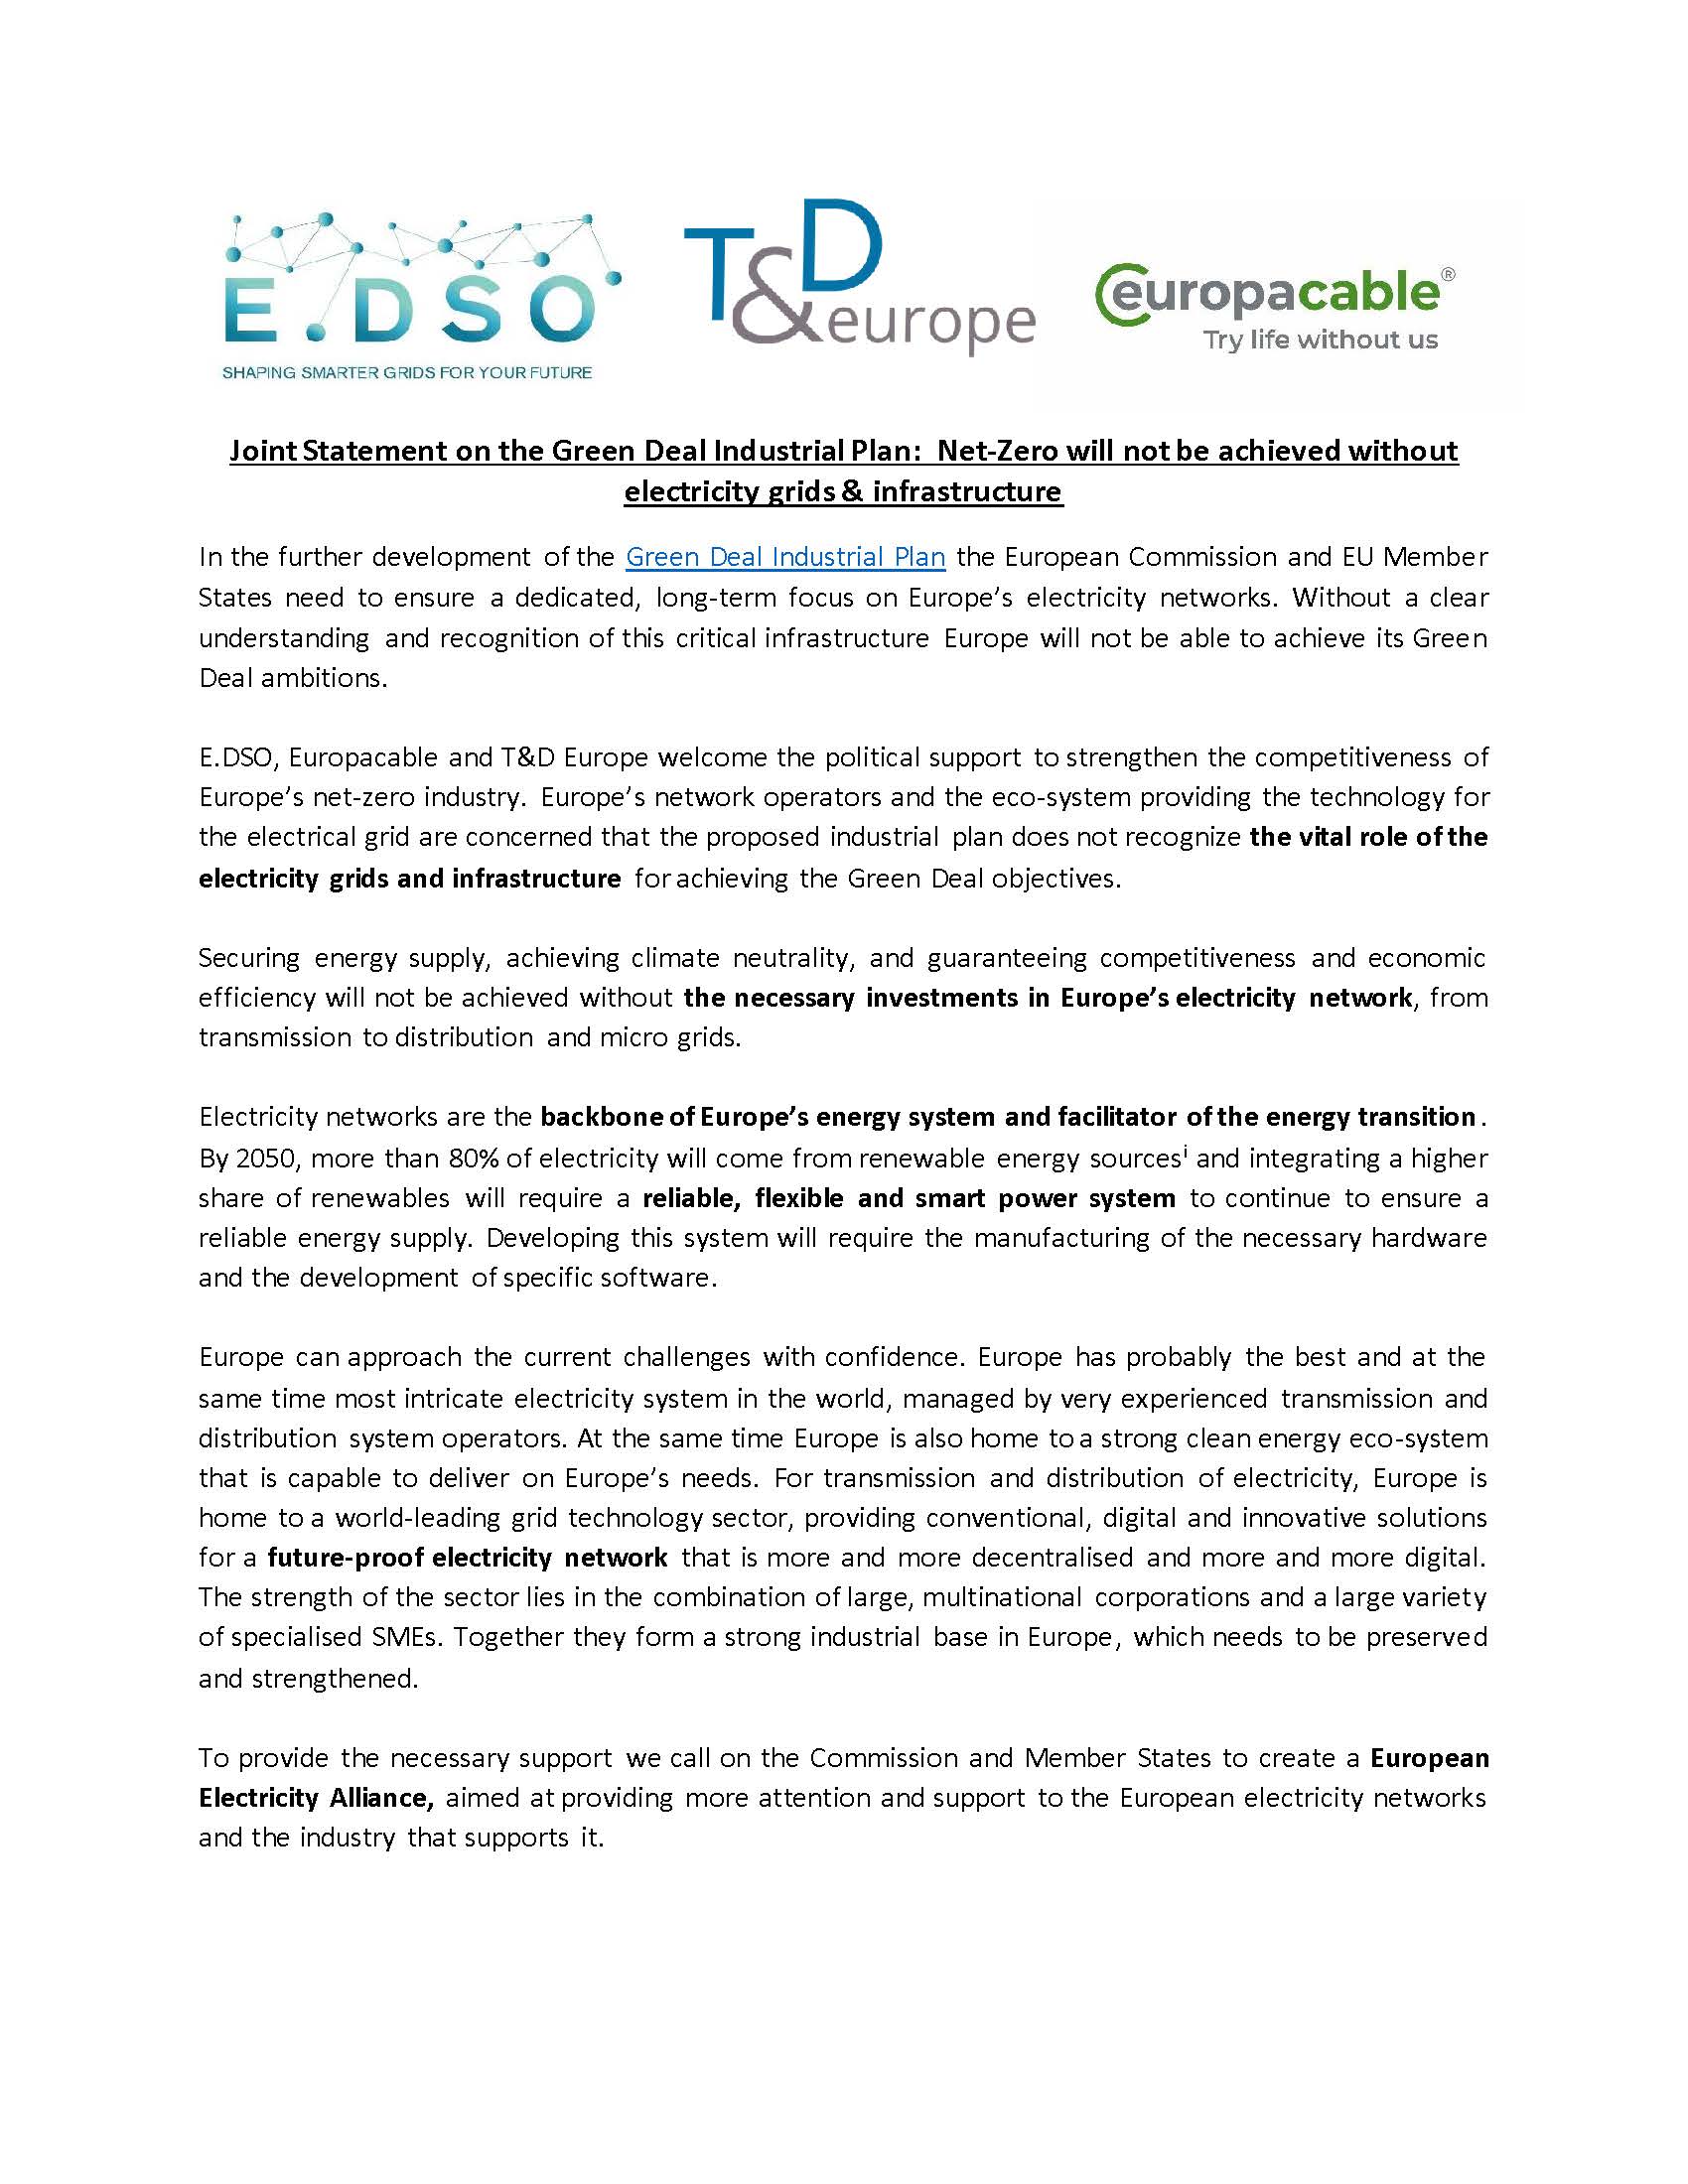 E.DSO/ Europacable/T&D Europe Joint Statement on the Green Deal Industrial Plan:  Net-Zero will not be achieved without electricity grids & infrastructure